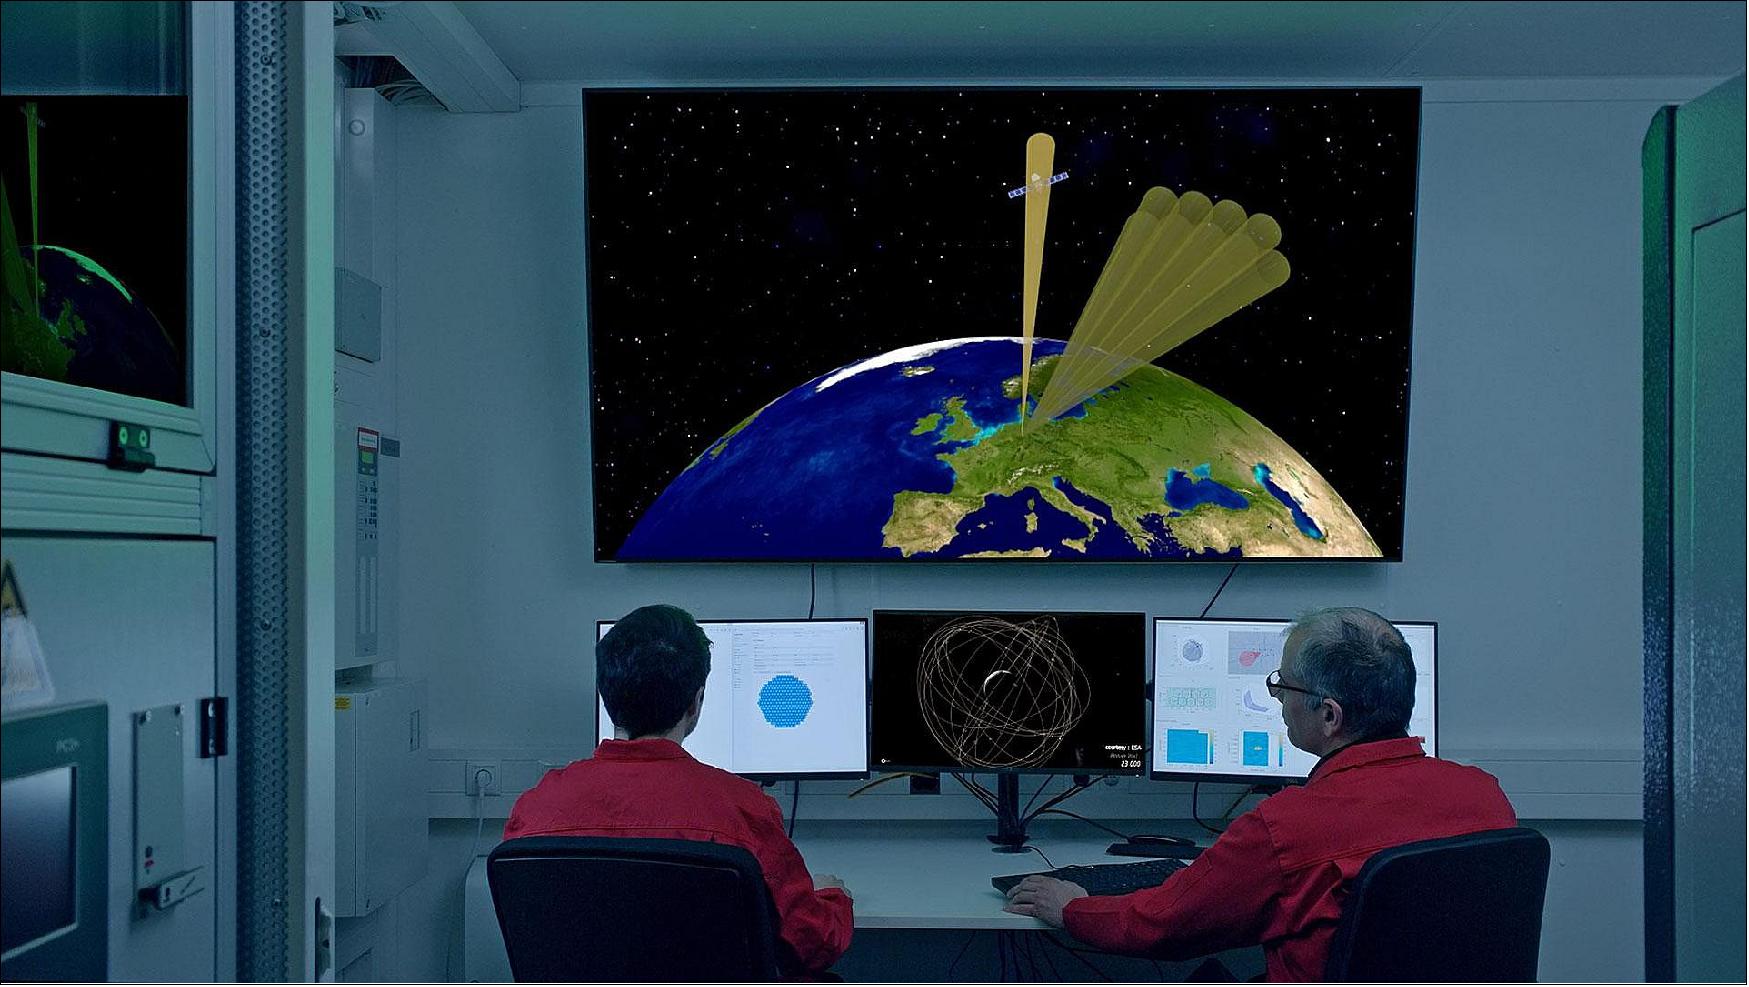 Figure 6: GESTRA monitoring and control room (image credit: FHR)